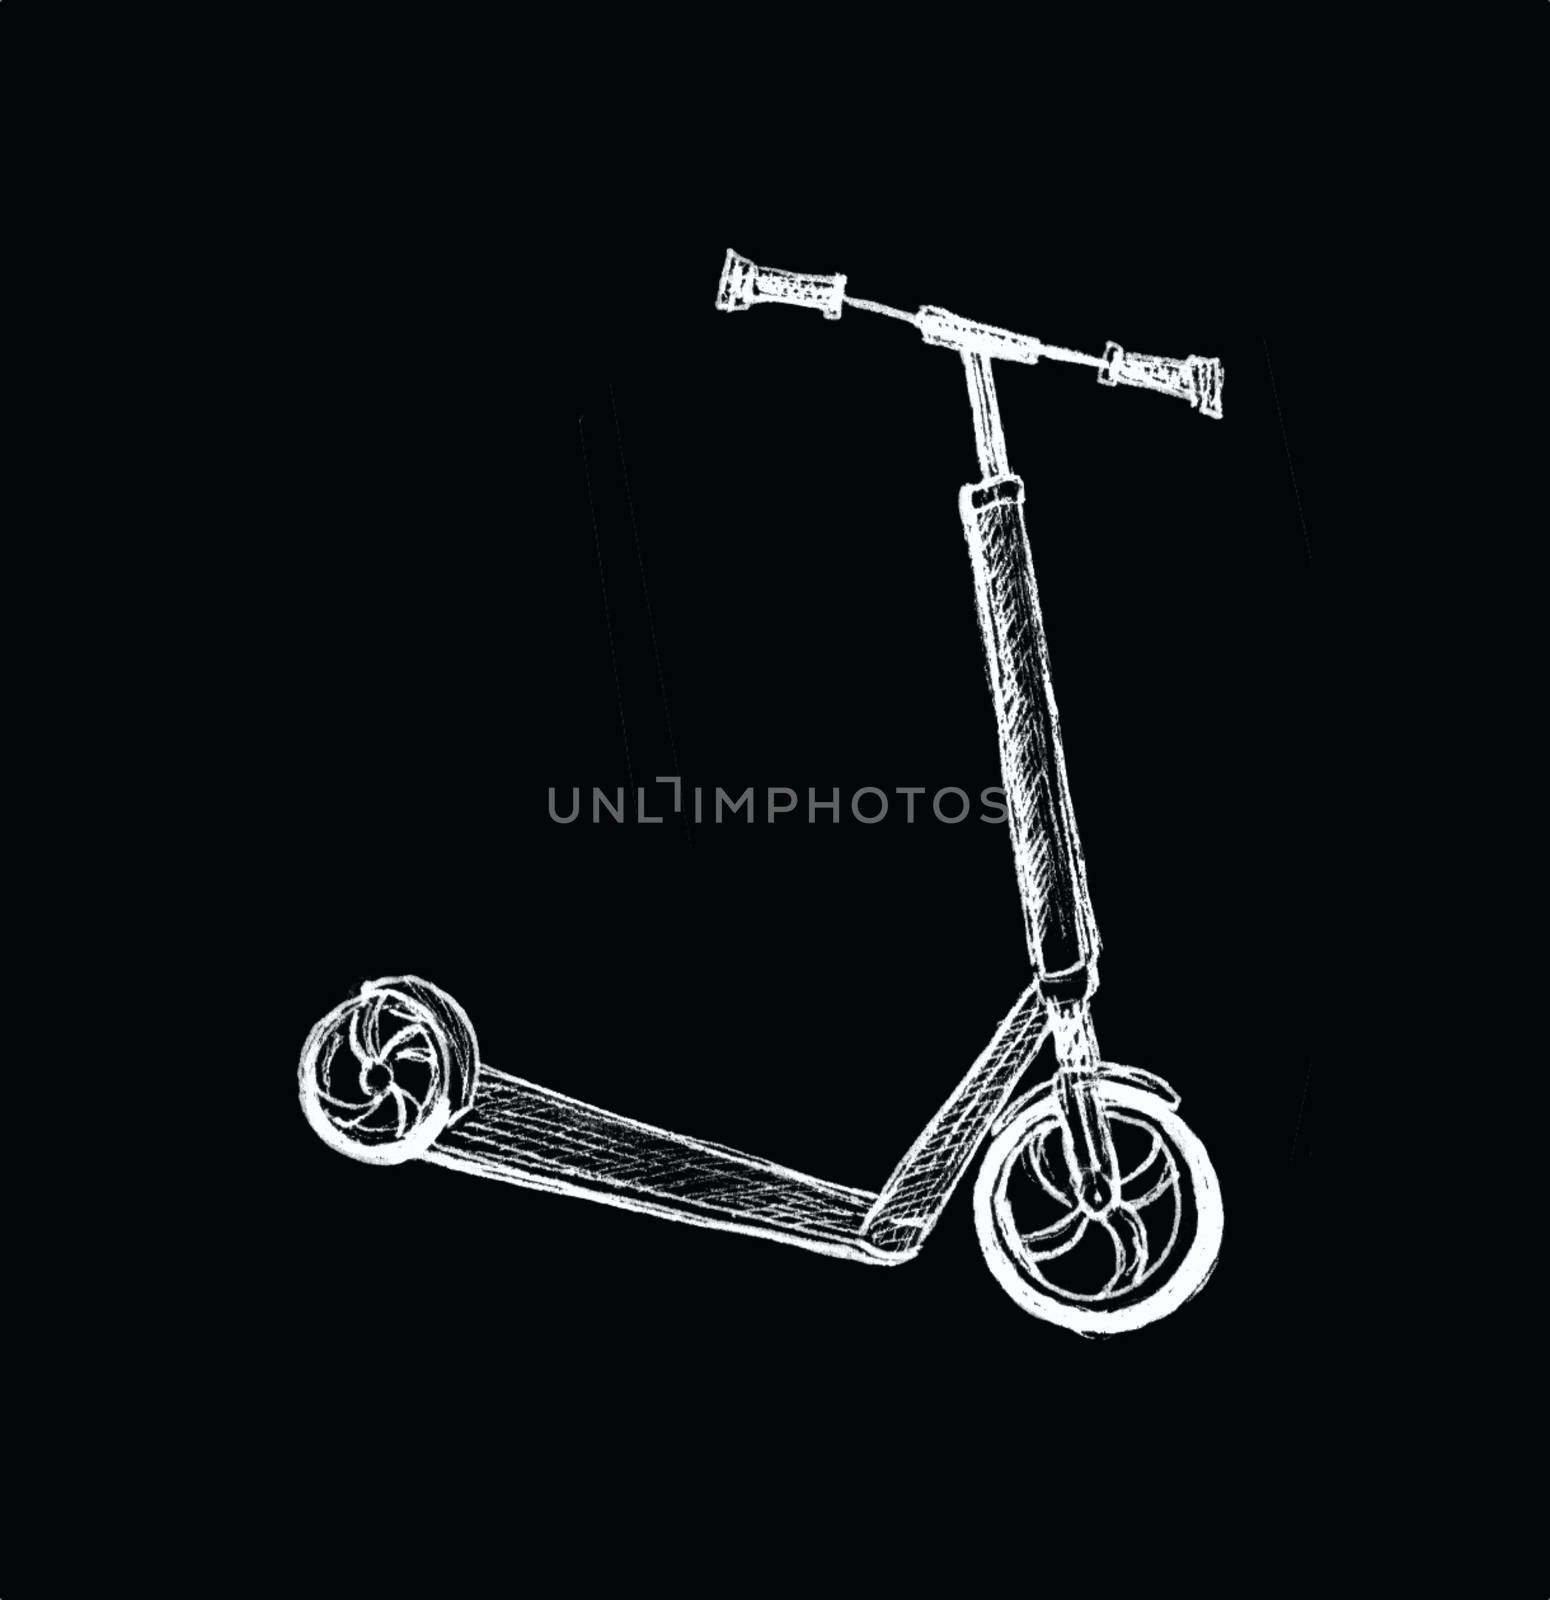 Scooter sketch isolated on black background. Eco alternative transport concept. Han-drawn illustration. 